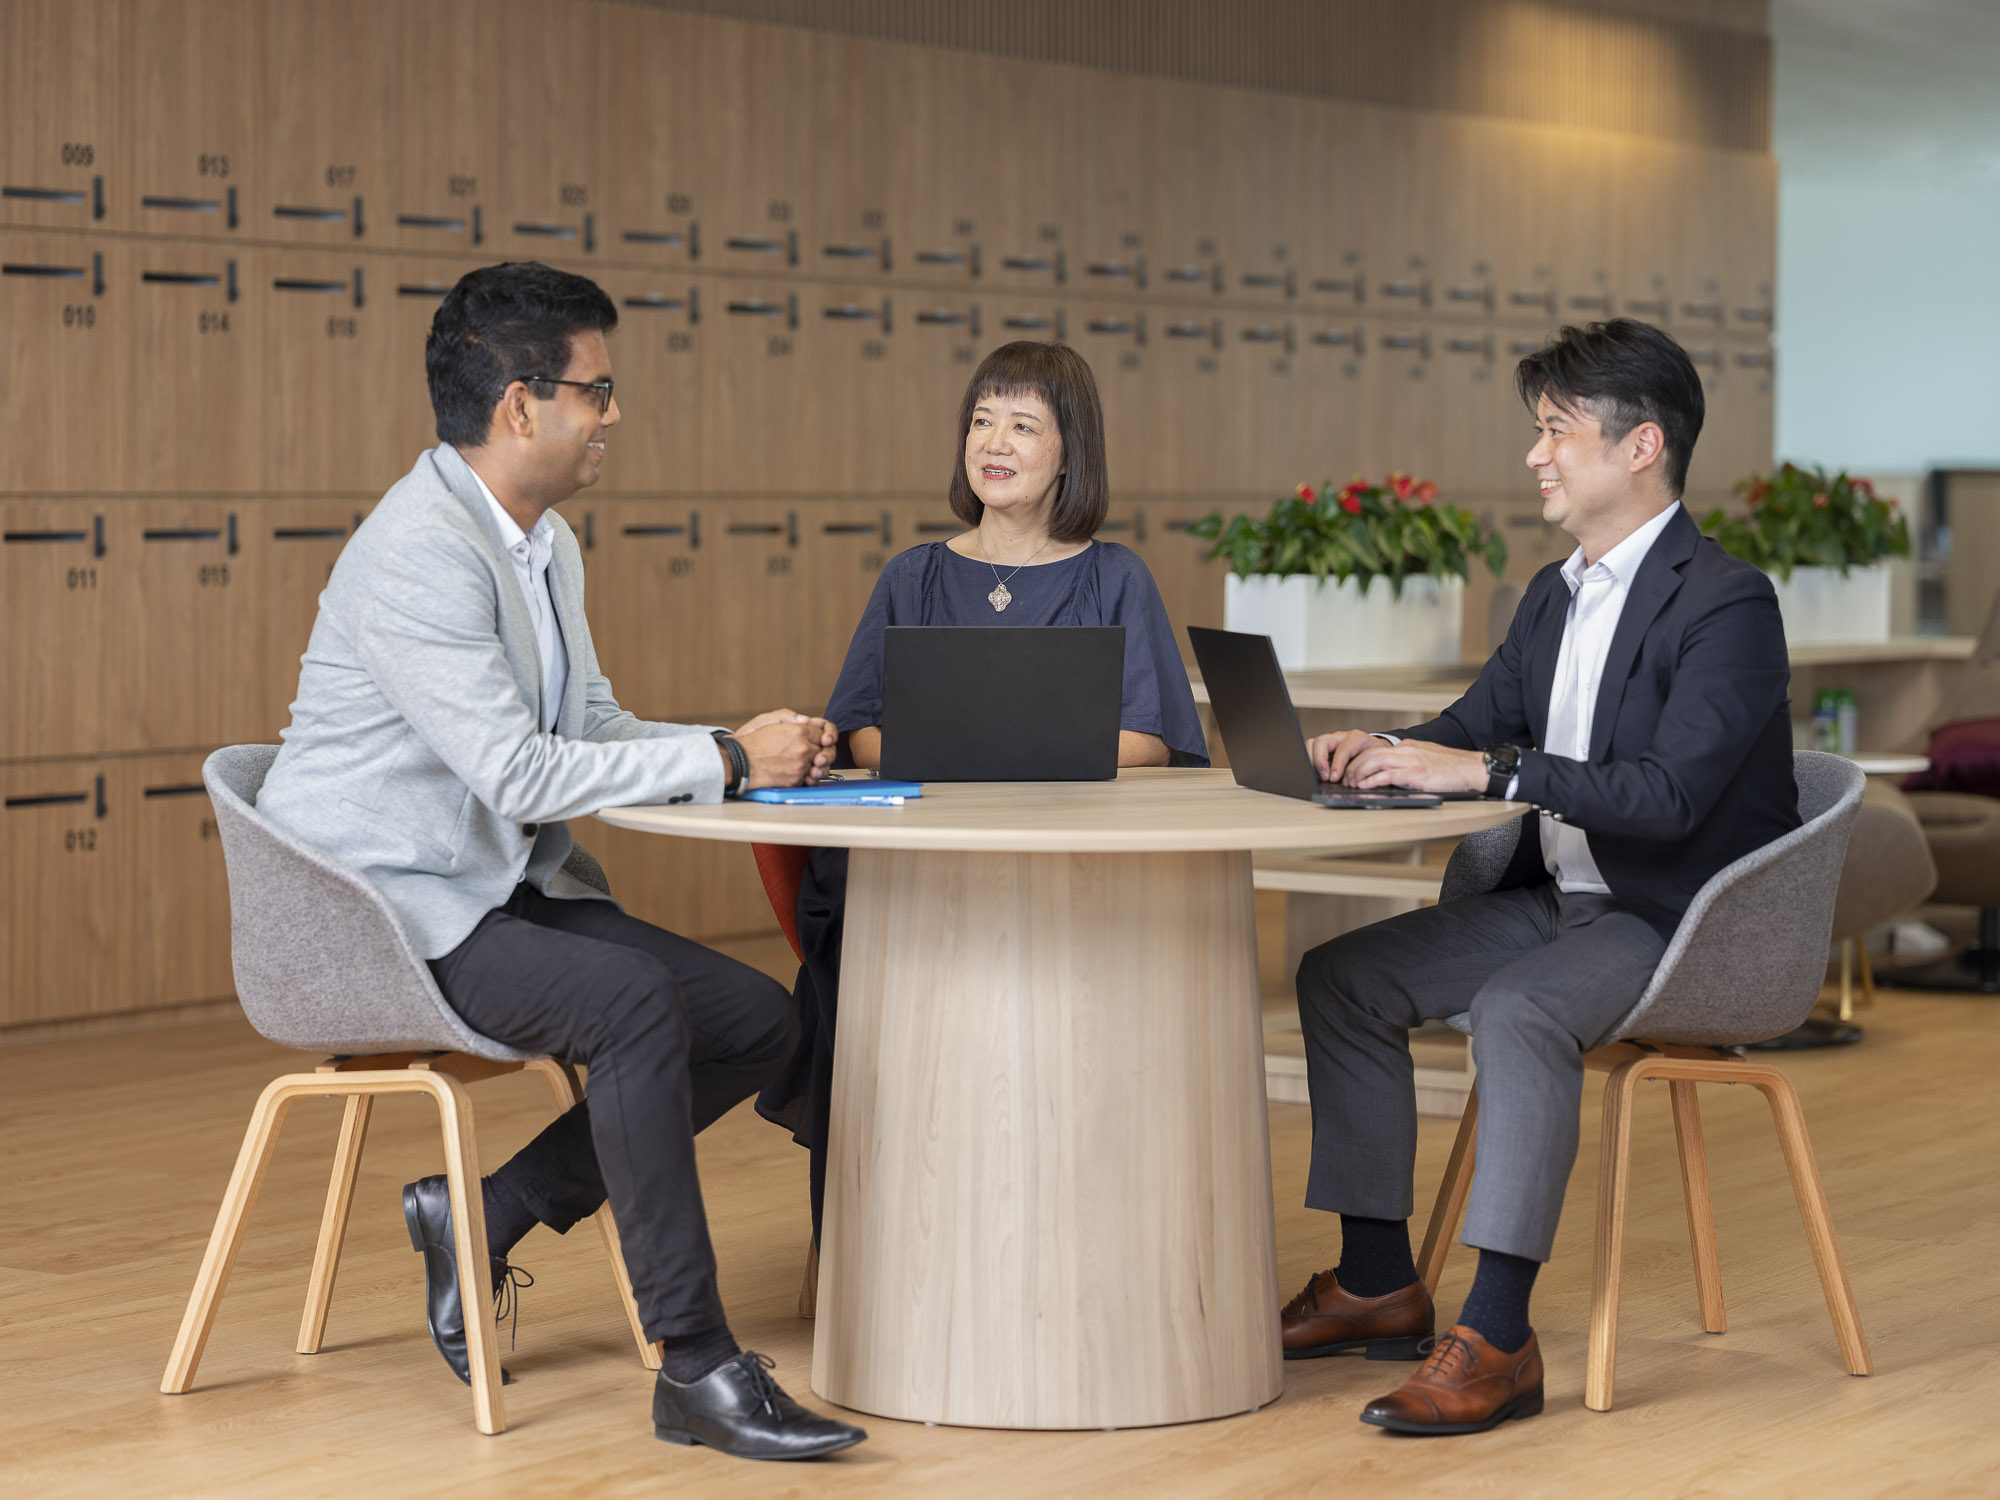 Commercial photography studio stock office image Singapore corporate 8